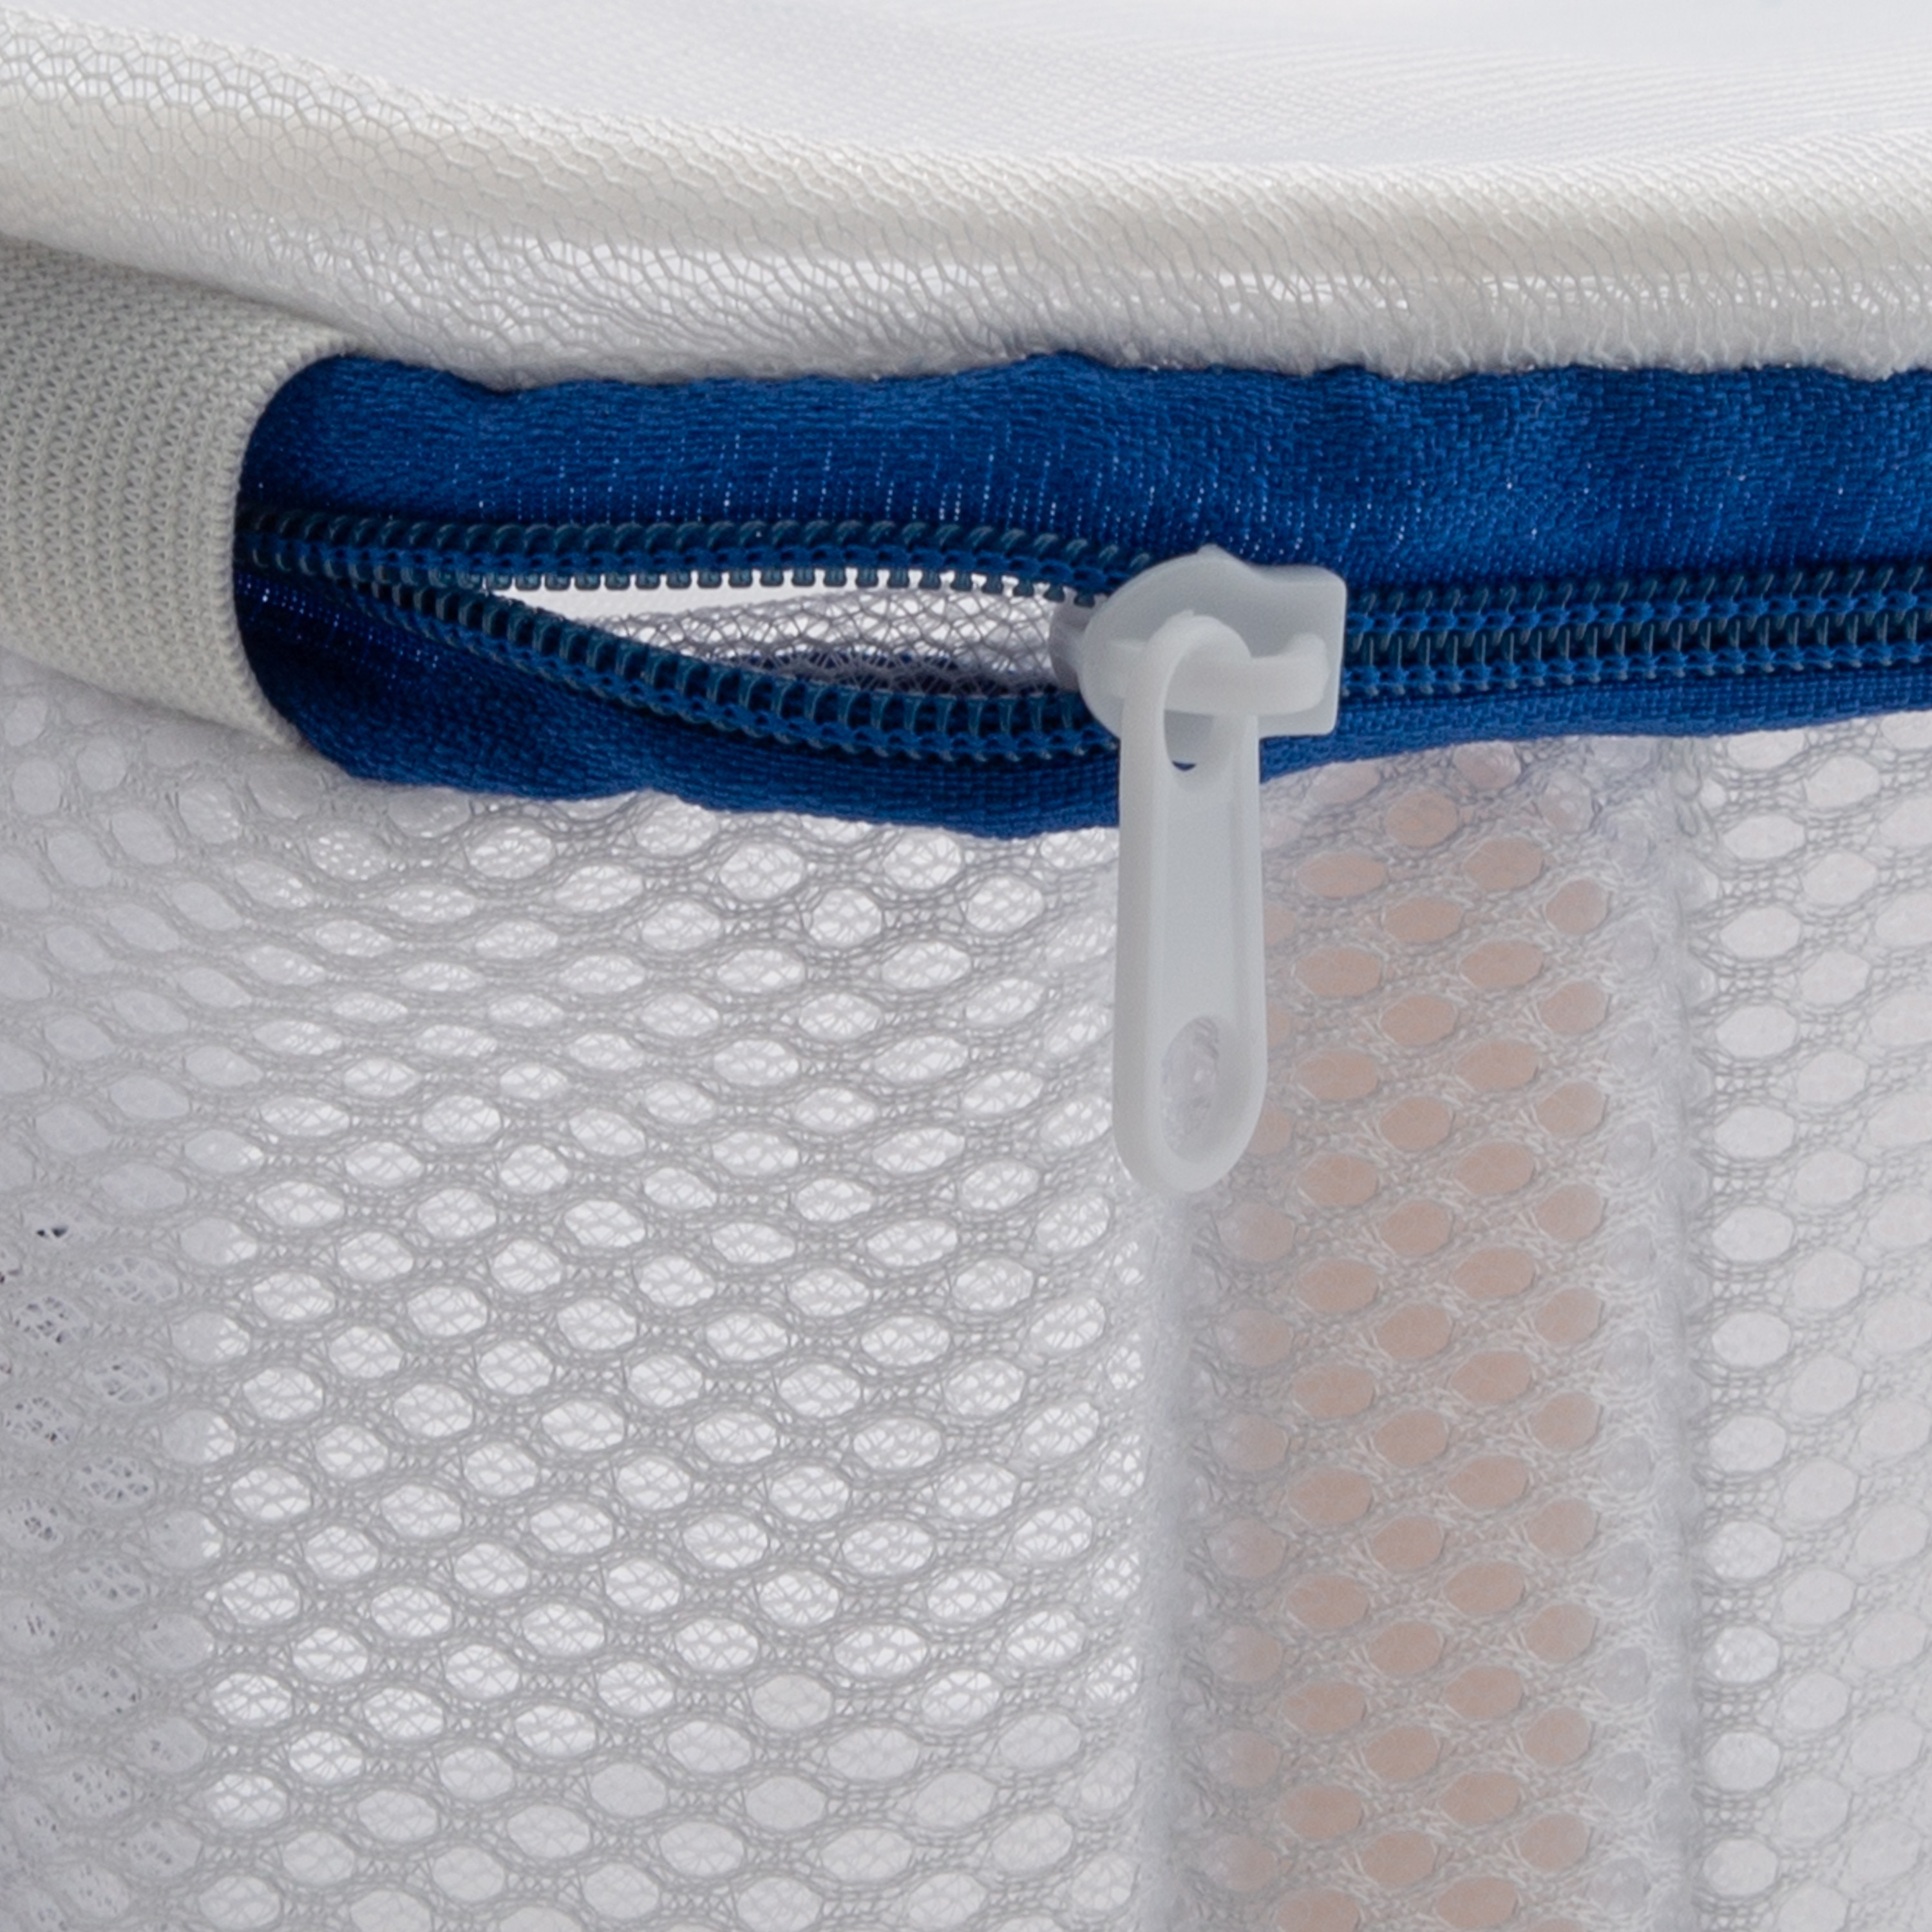 Woolite Synthetic Mesh Laundry Bag with Lid, White, Collapsible, 1 Wash Bag,  6.25x6.25x4 inches, Bra Bag for 4 Full Size Bras in the Laundry Hampers &  Baskets department at